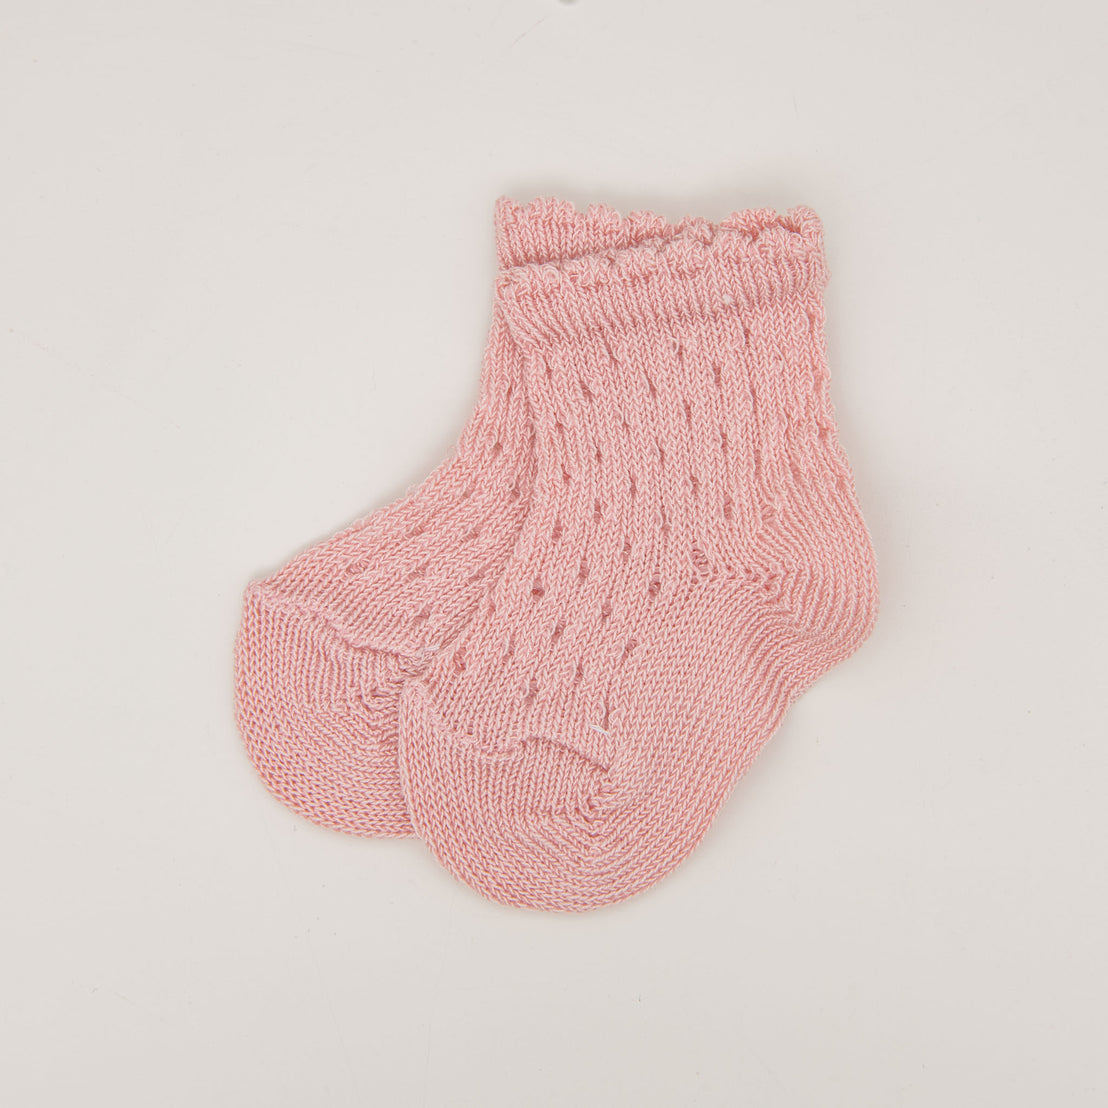 A pair of pink Scallop Edge Crochet Socks displayed on a plain white background.